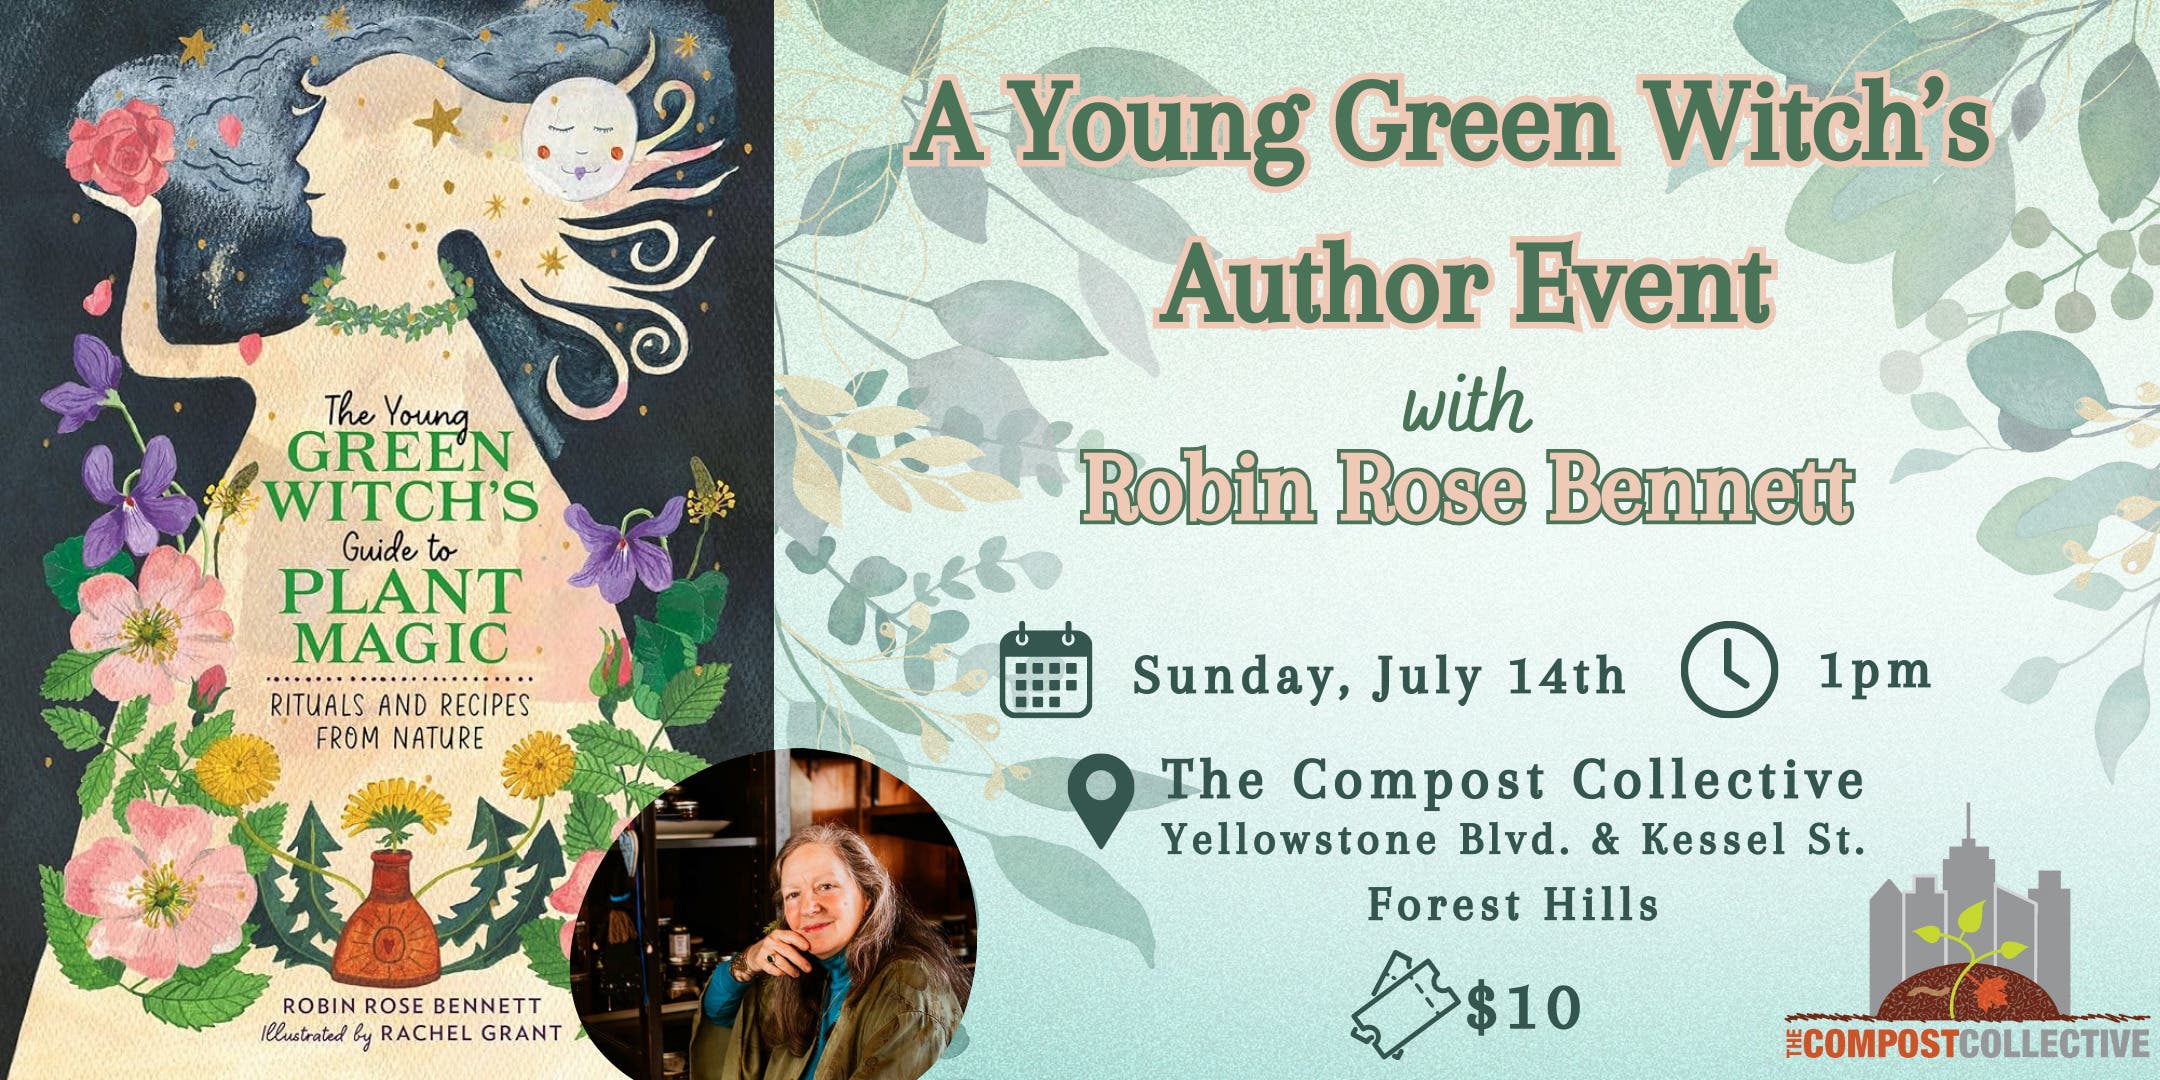 A Young Green Witch's Author Event with Robin Rose Bennett